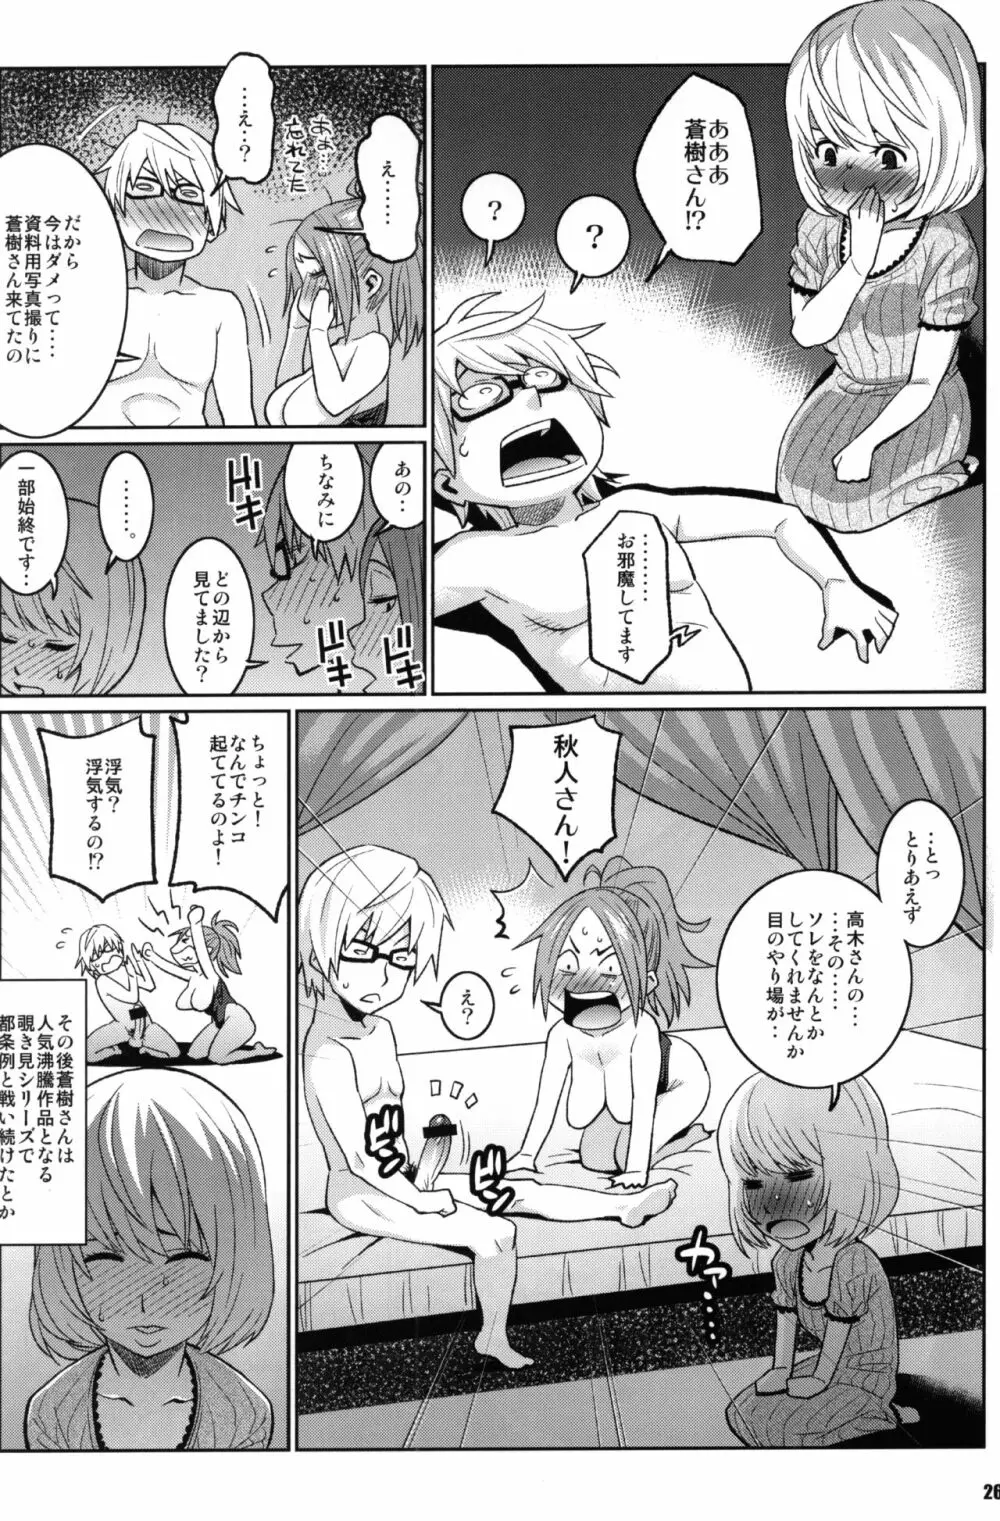 BAKUNEW 3 Page.25